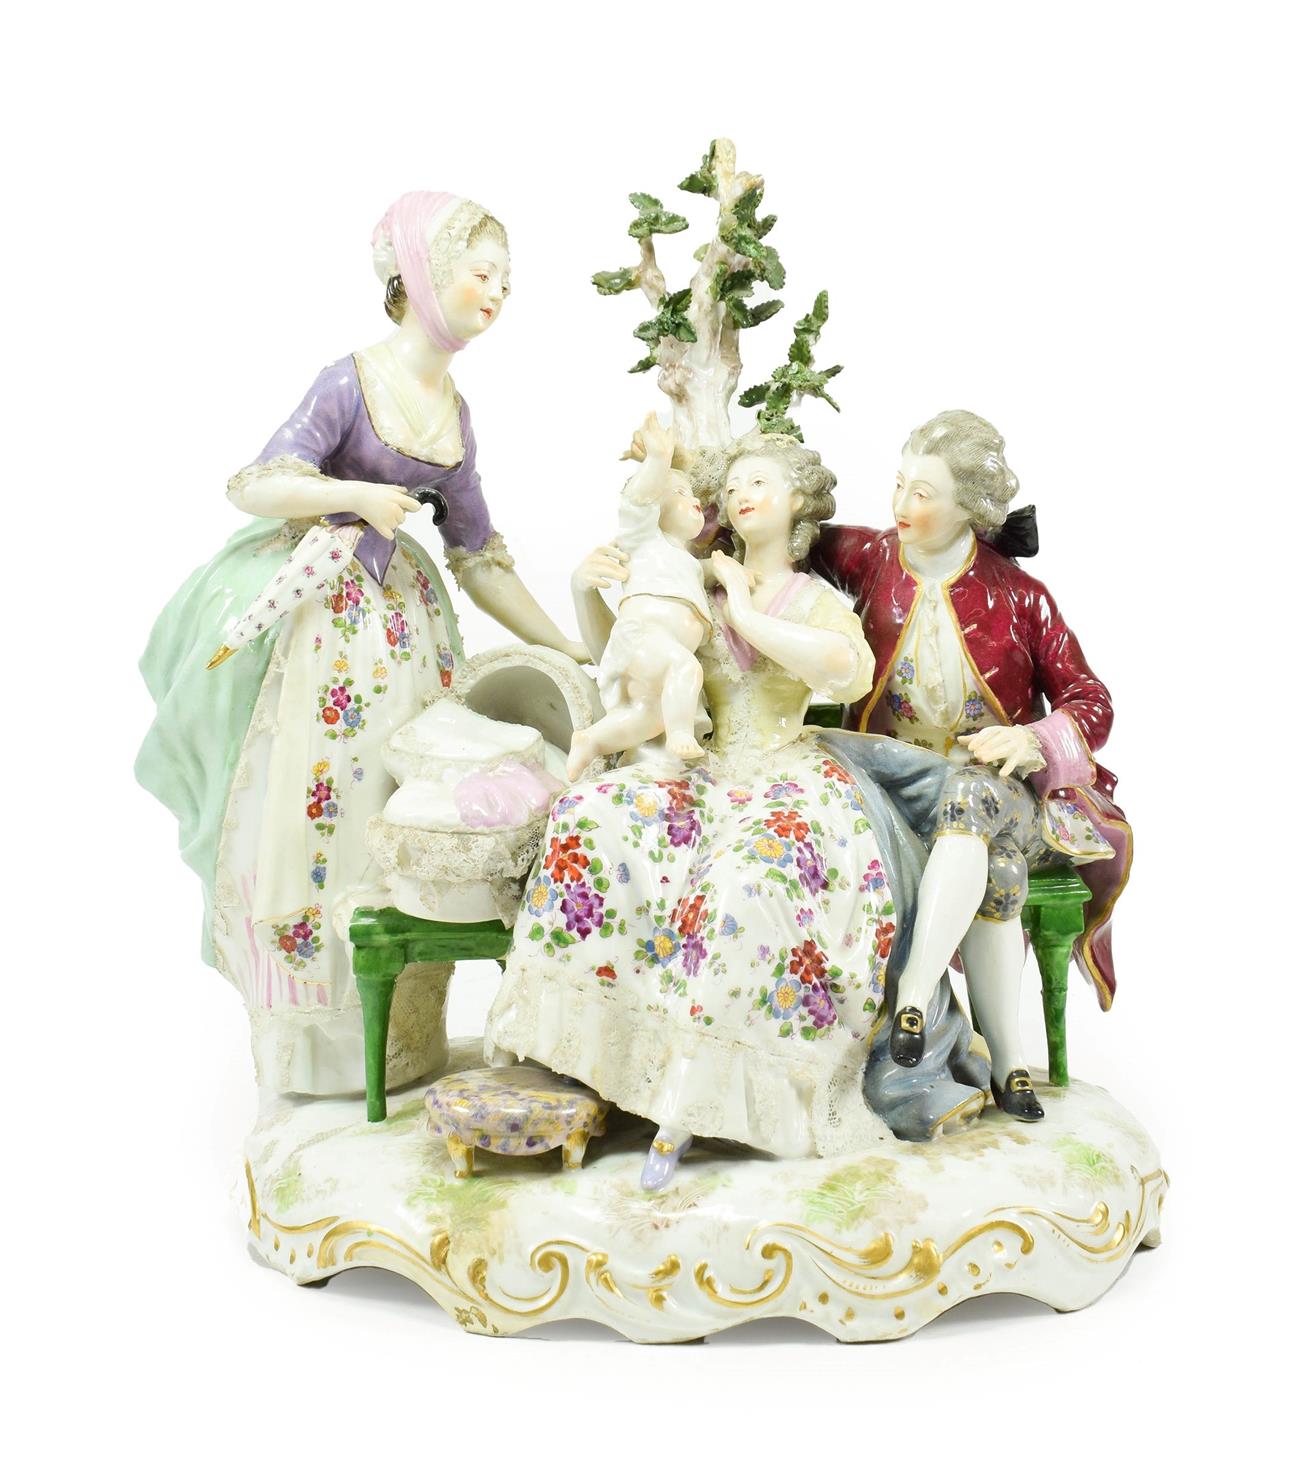 Lot 55 - A Meissen Style Porcelain Figure Group, late 19th century, modelled and painted as an 18th...